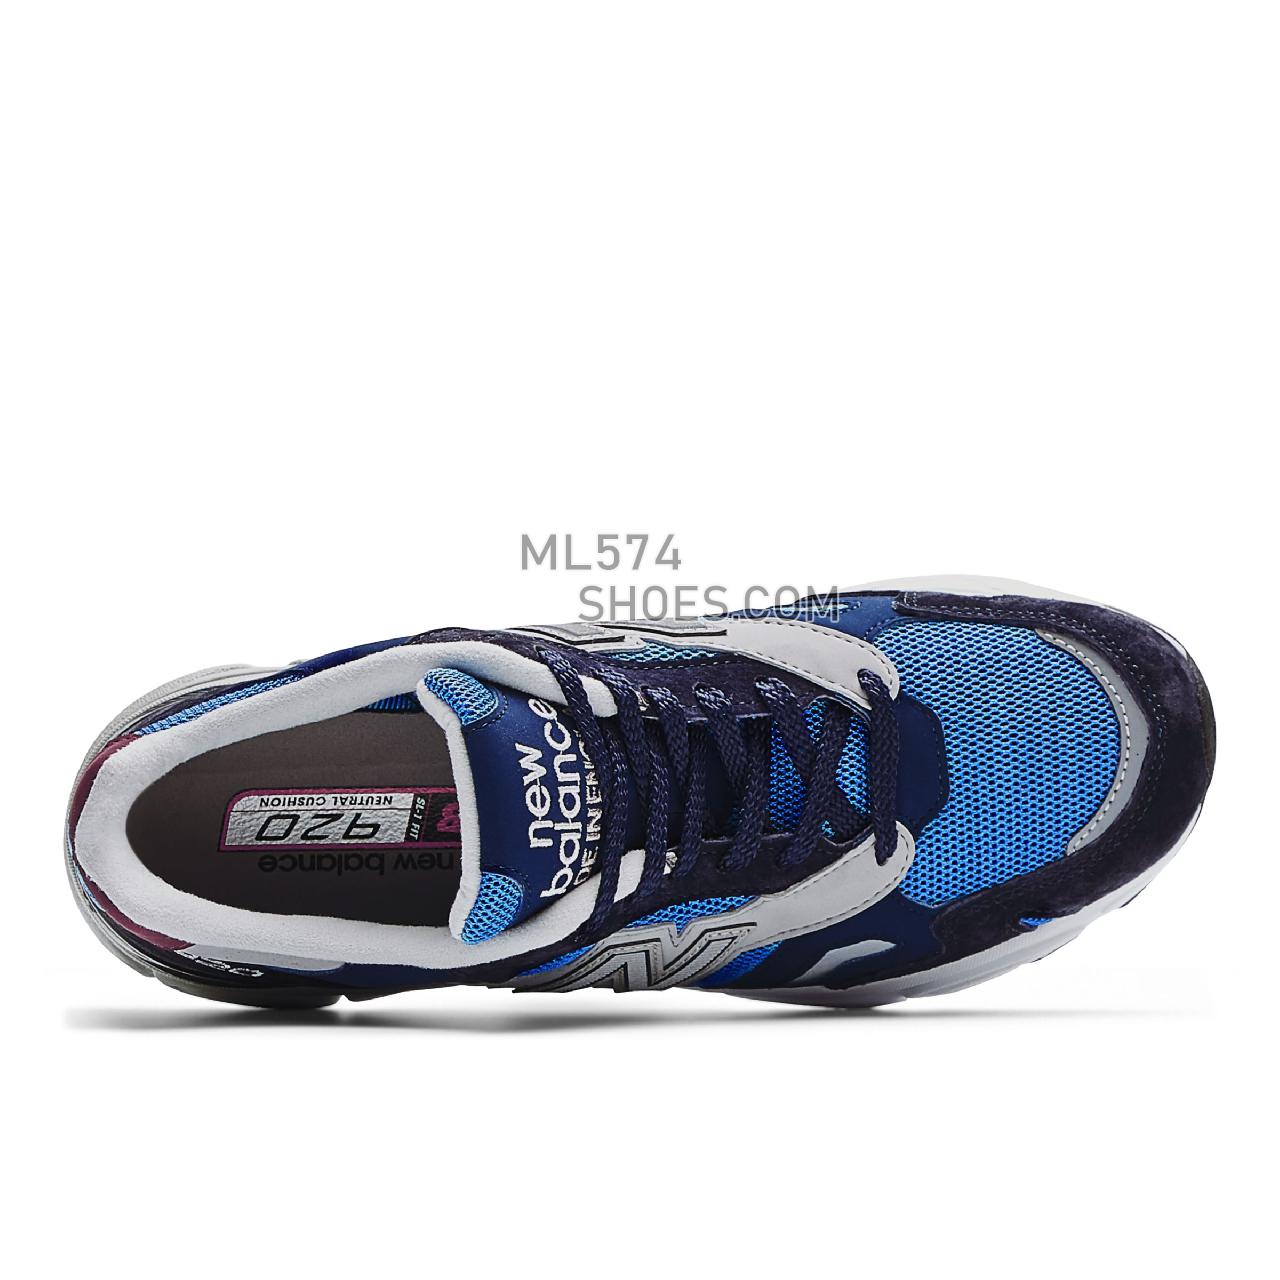 New Balance Made in UK 920 - Men's Made in USA And UK Sneakers - Navy with Blue and Burgundy - M920SCN